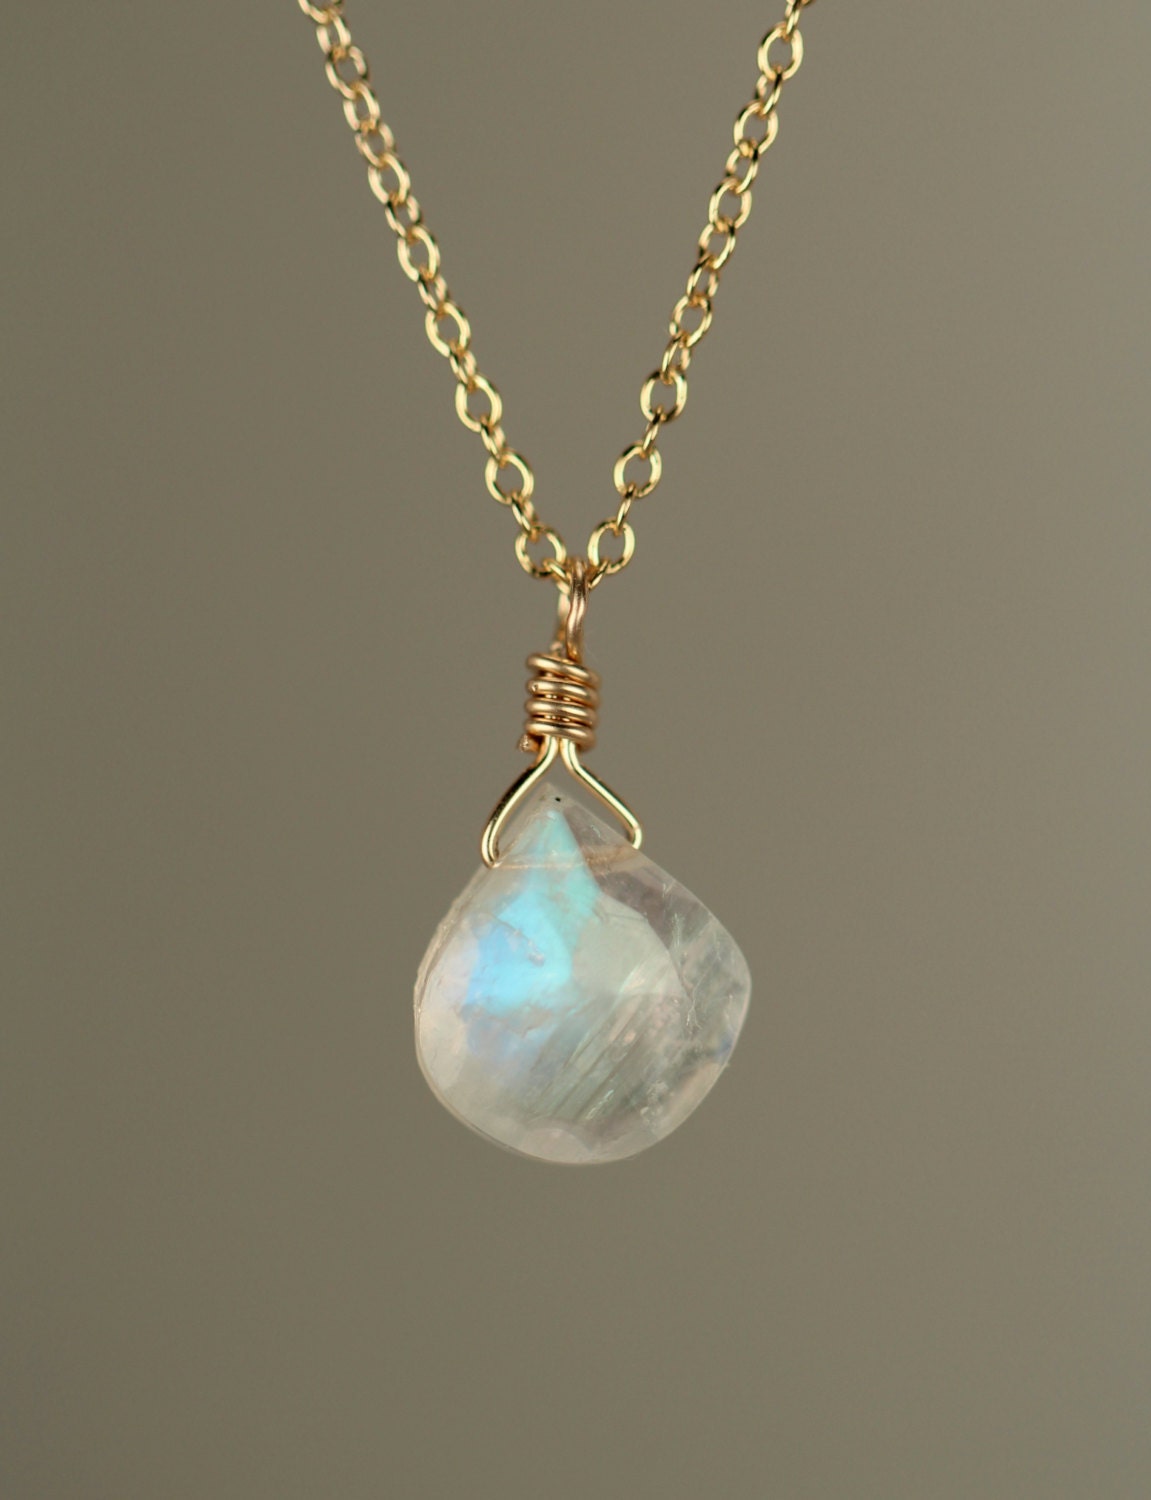 Moonstone Necklace Rainbow Moonstone Necklace Dainty Crystal Necklace